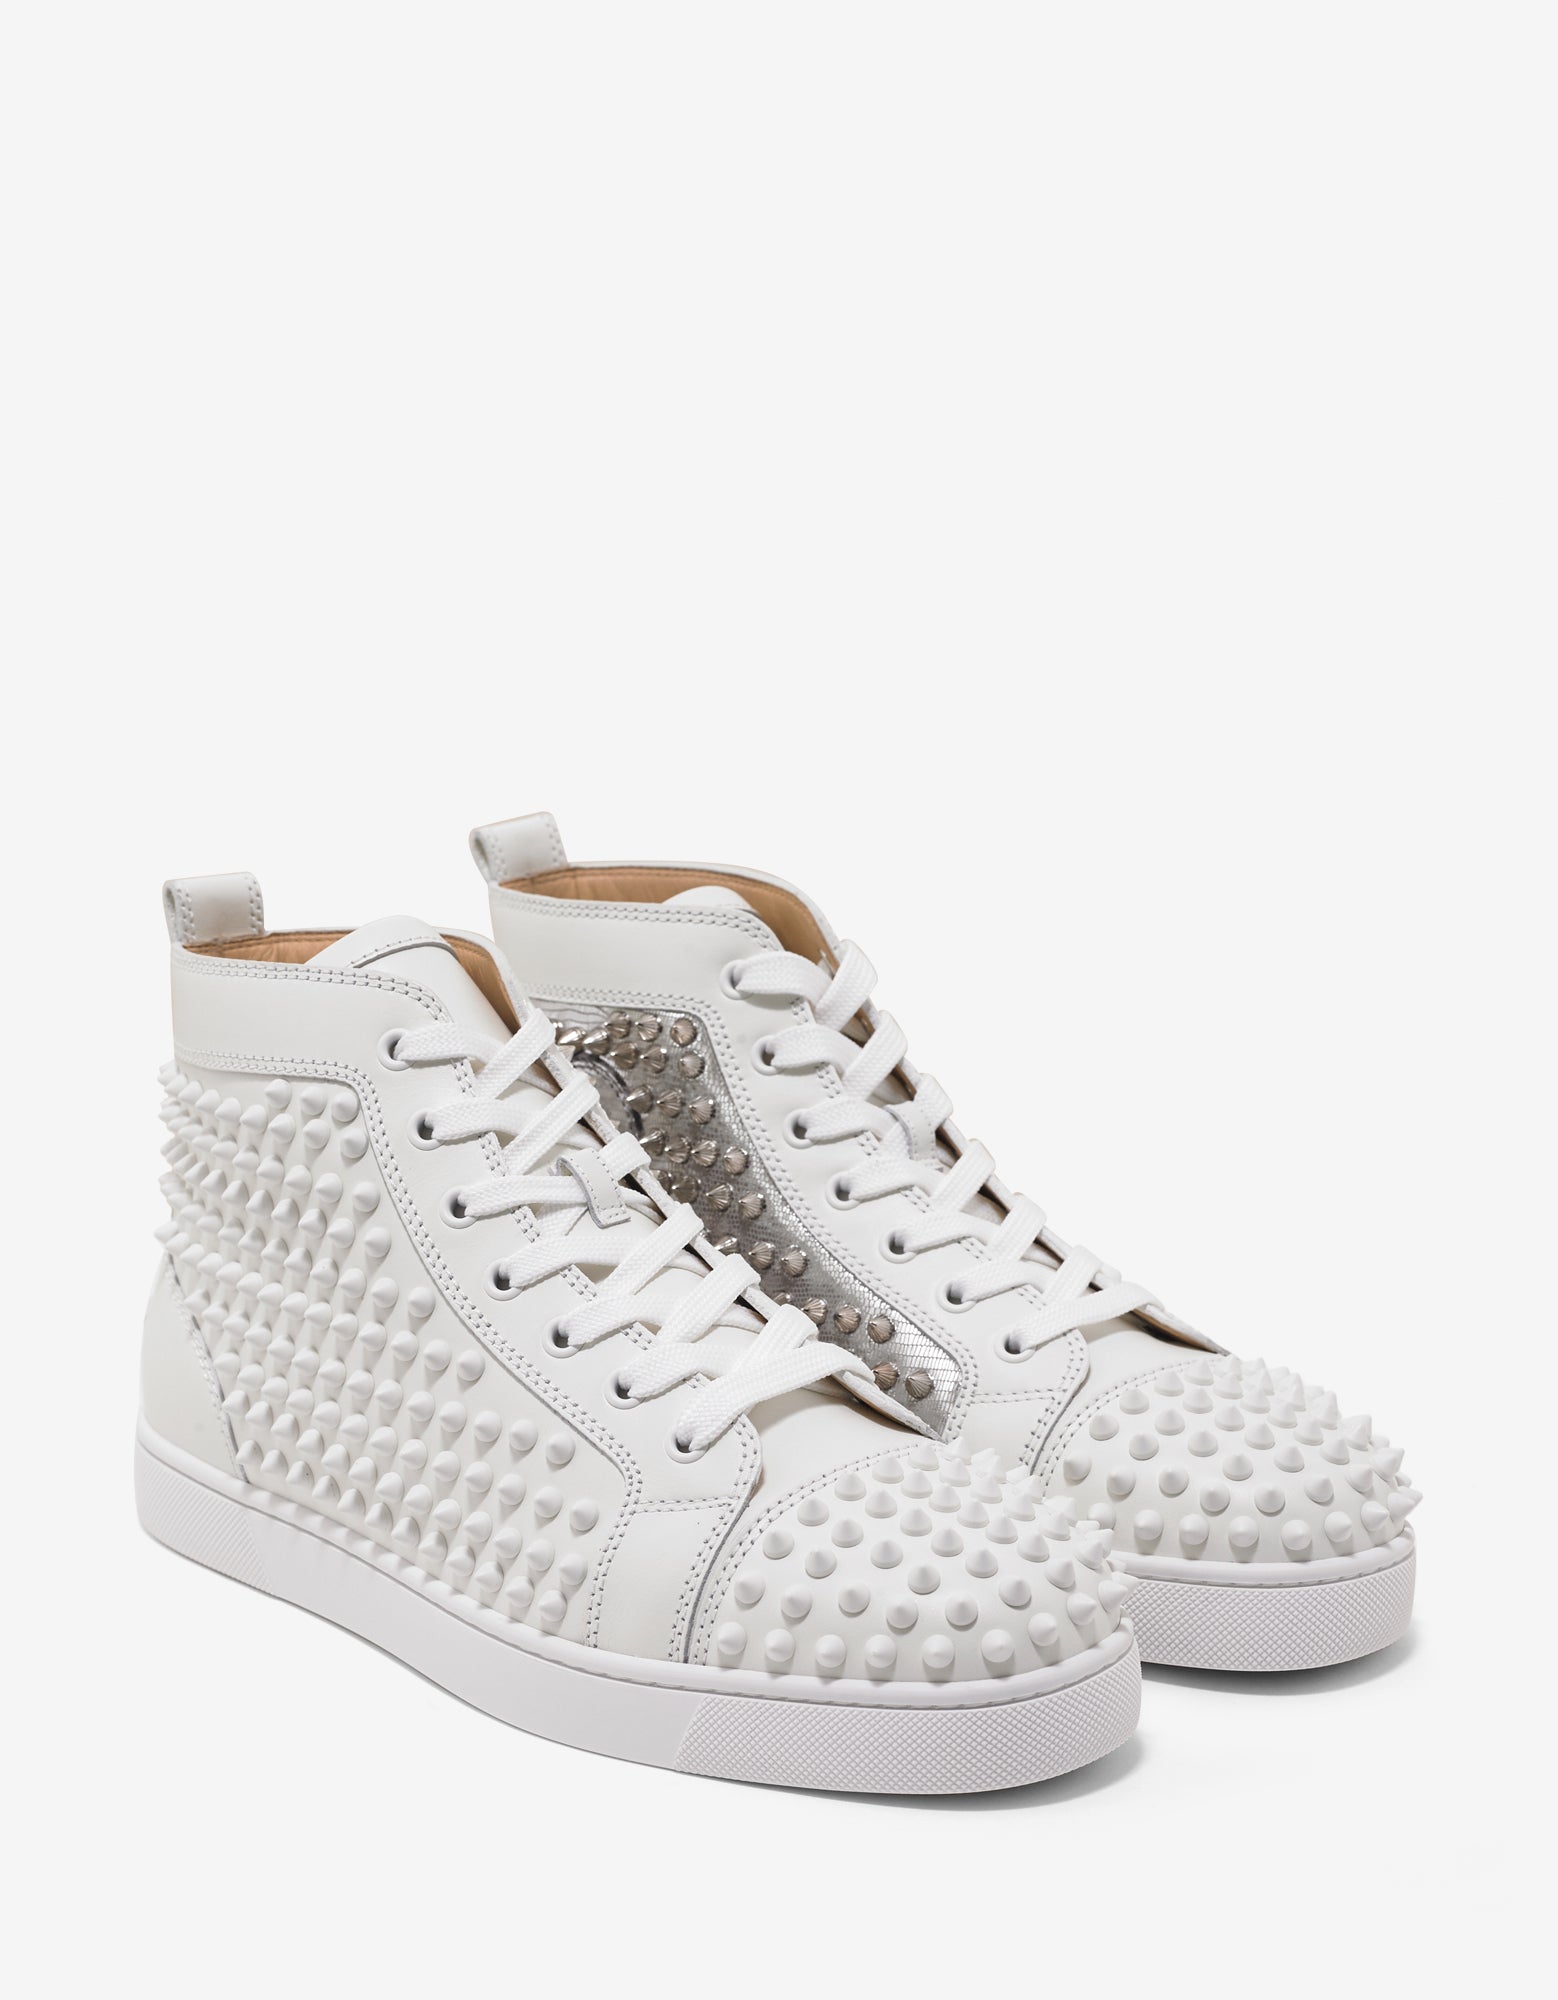 Christian Louboutin Yang Louis Flat High Top Trainers with Silver Panel ...